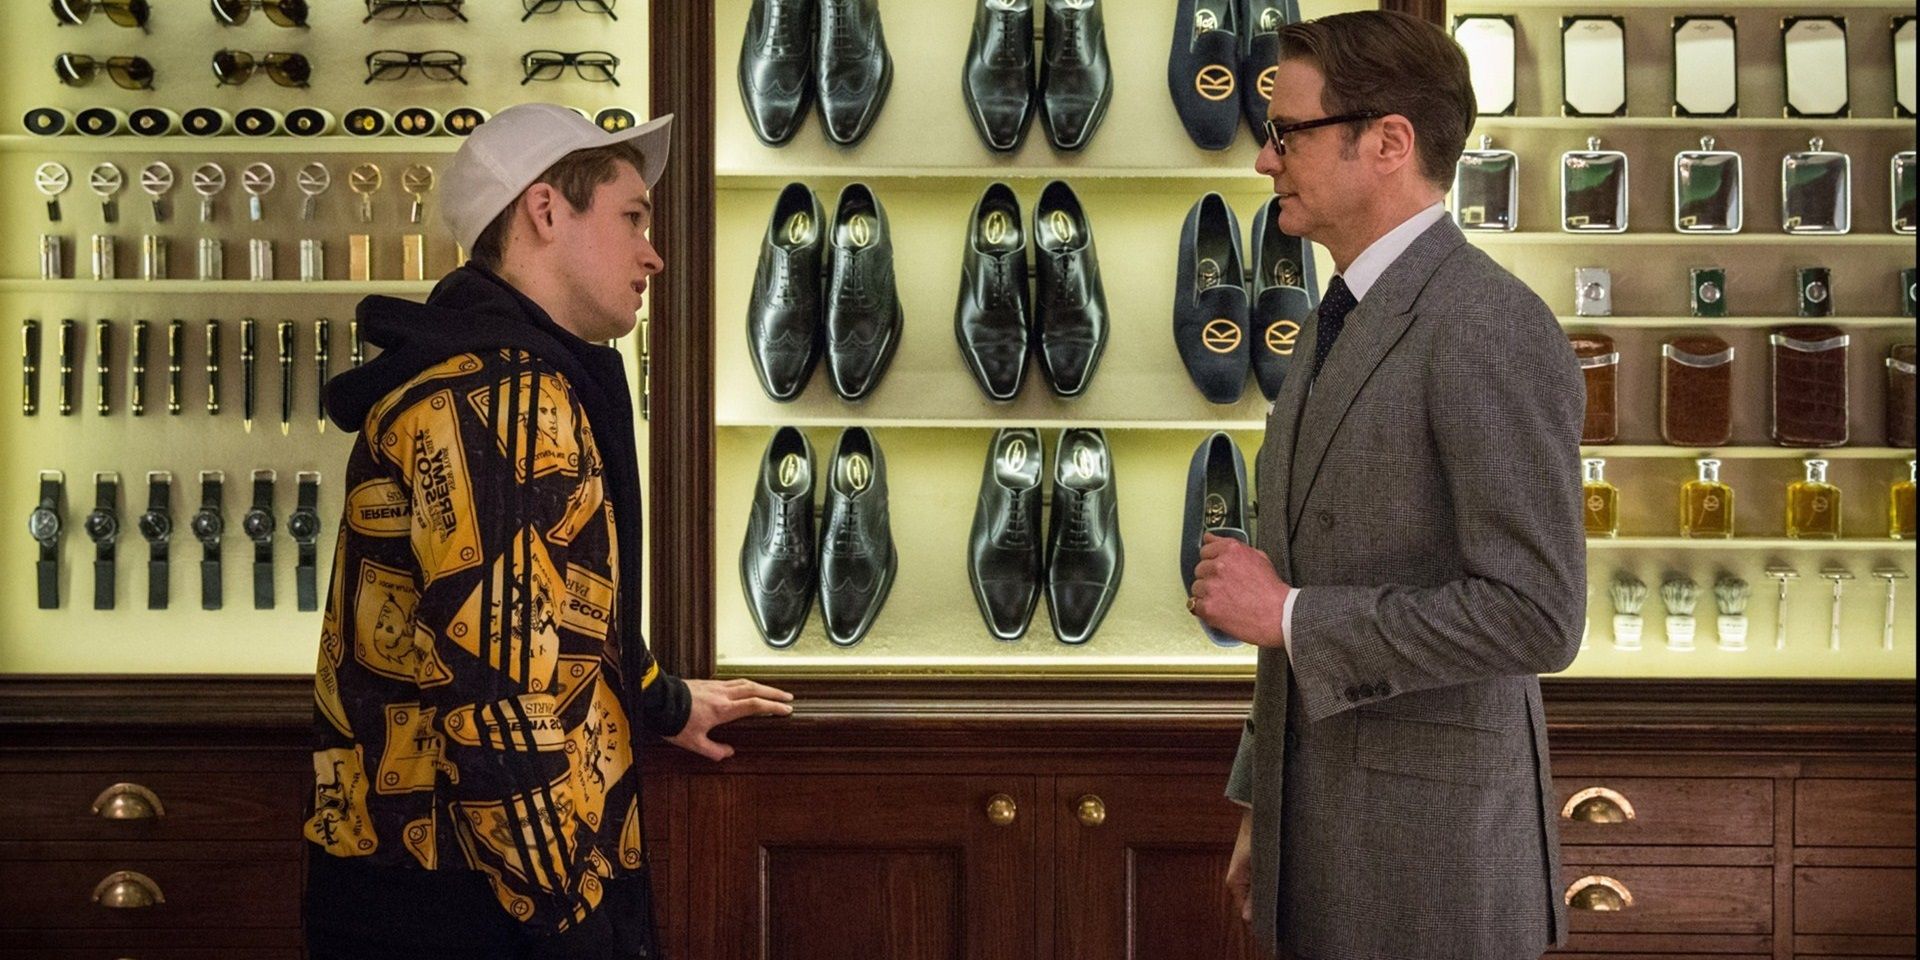 Colin Firth and Taron Egerton talking in front of a shoe display in Kingsman The Secret Service